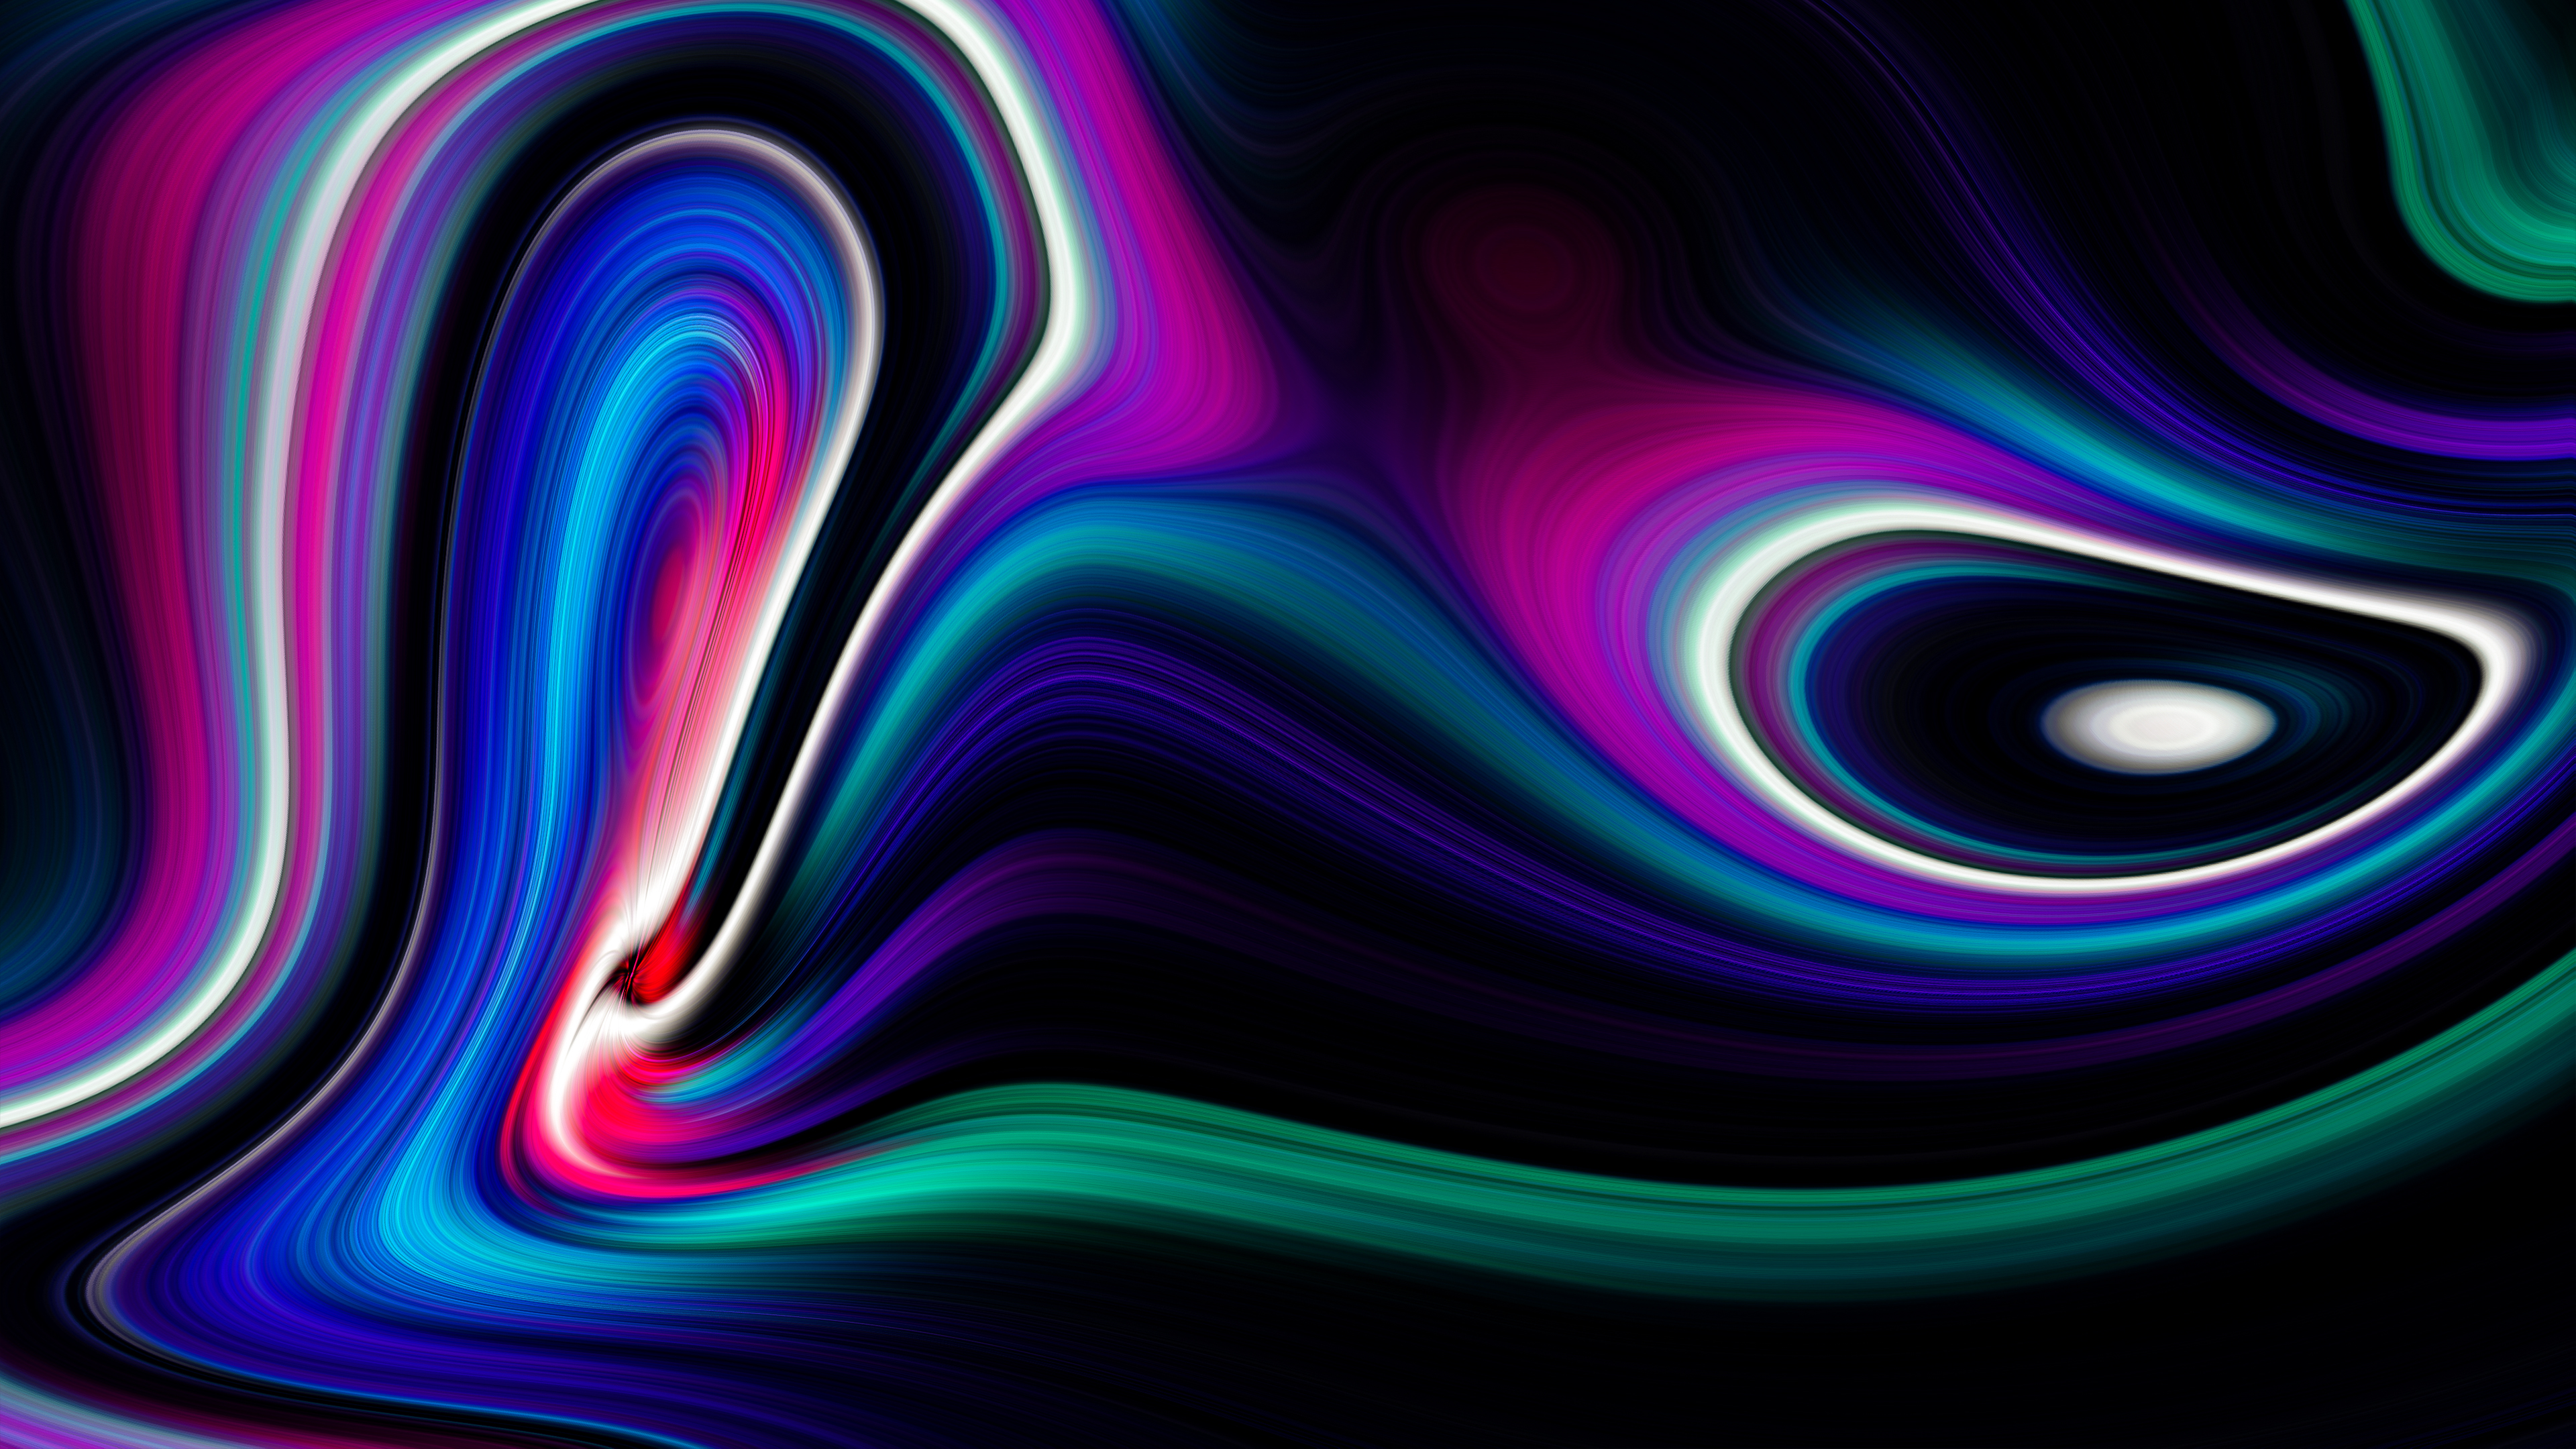 free download purple swirl abstract 4k live wallpaper on swirls abstract 4k wallpapers